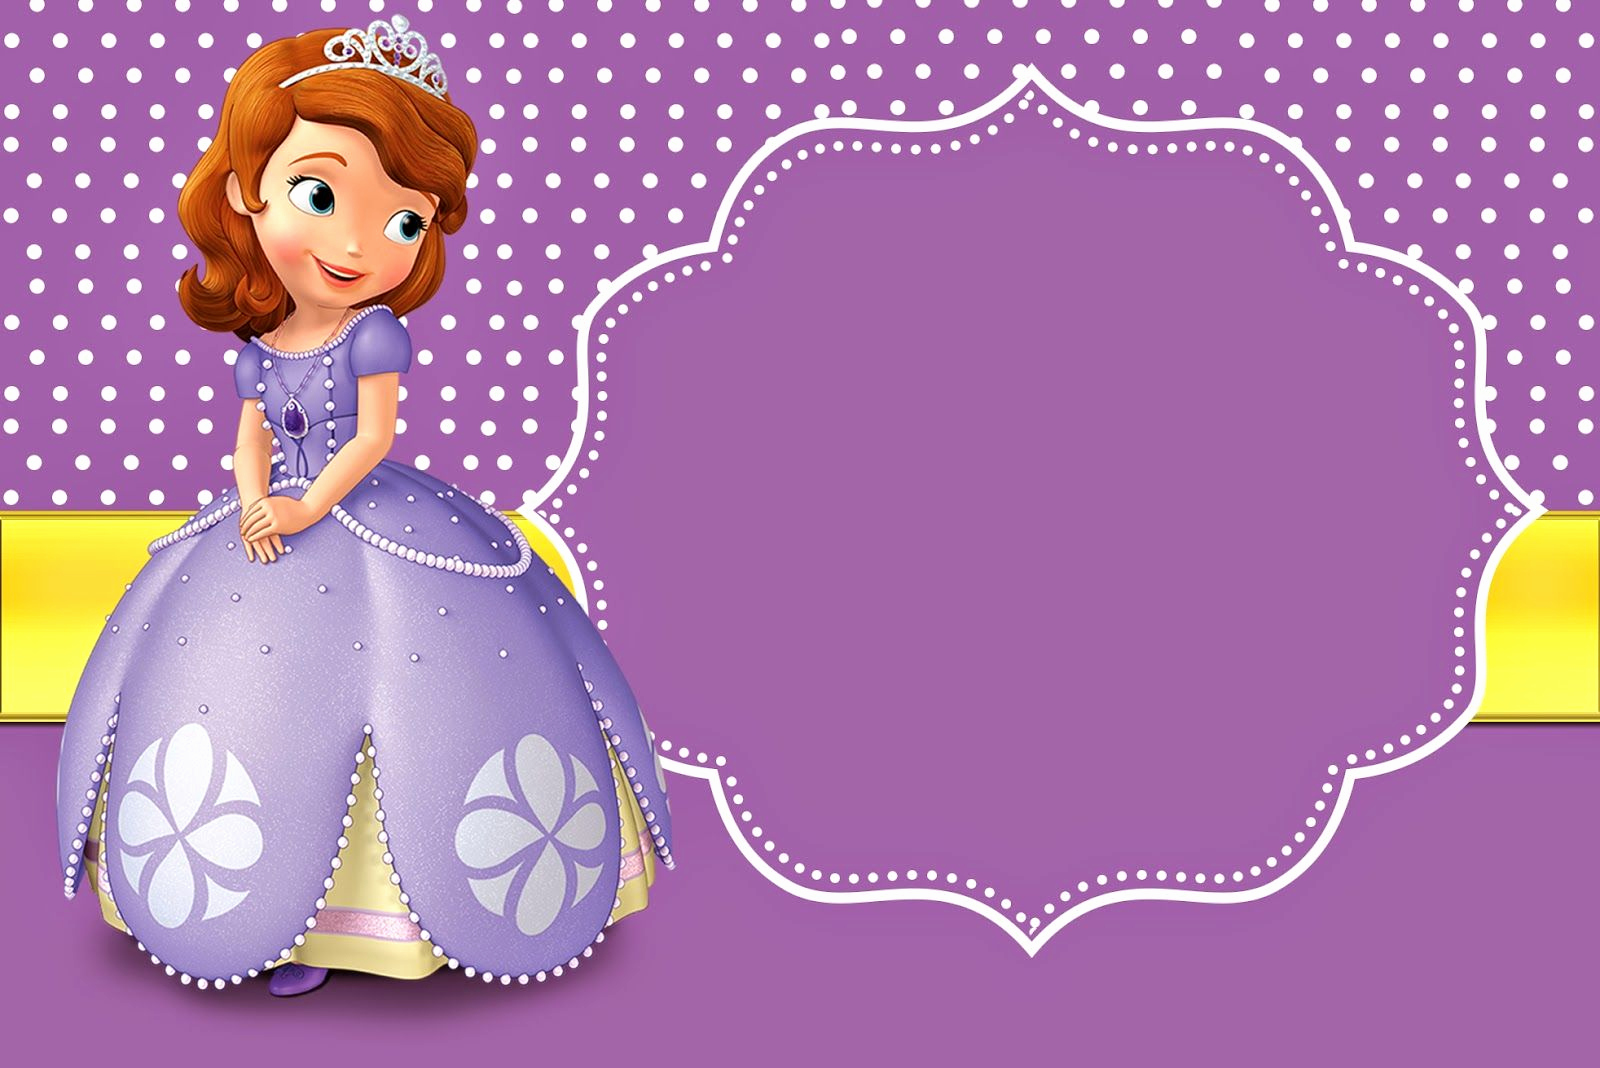 Sofia the First Invitation Templates Best Of sofia the First Free Printable Invitations